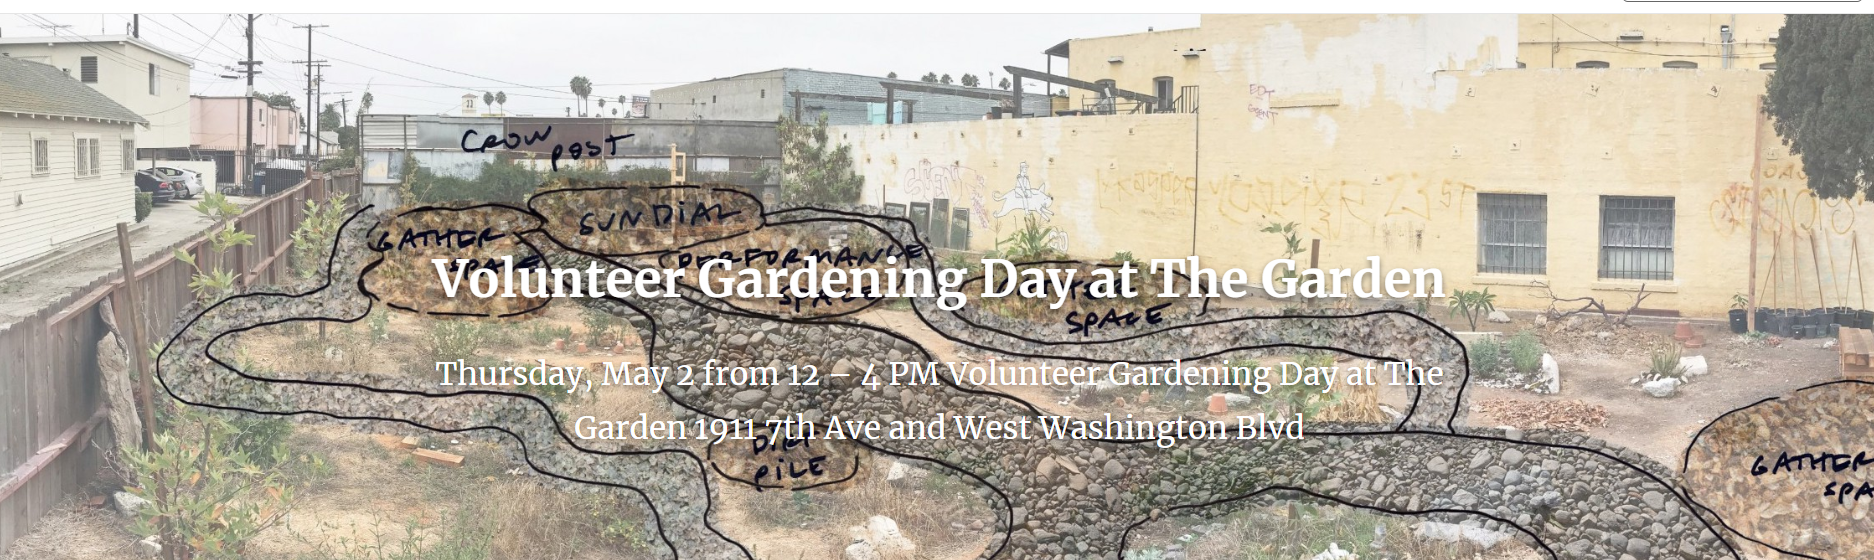 The image shows a building with graffiti. The graffiti includes words like "CROW," "POST," "GATHER," "Volunteer Gardening Day at The Garden," "SPACE," and "SPA." The location mentioned is 1911 7th Ave and West Washington Blvd. The image is tagged as panorama and text.